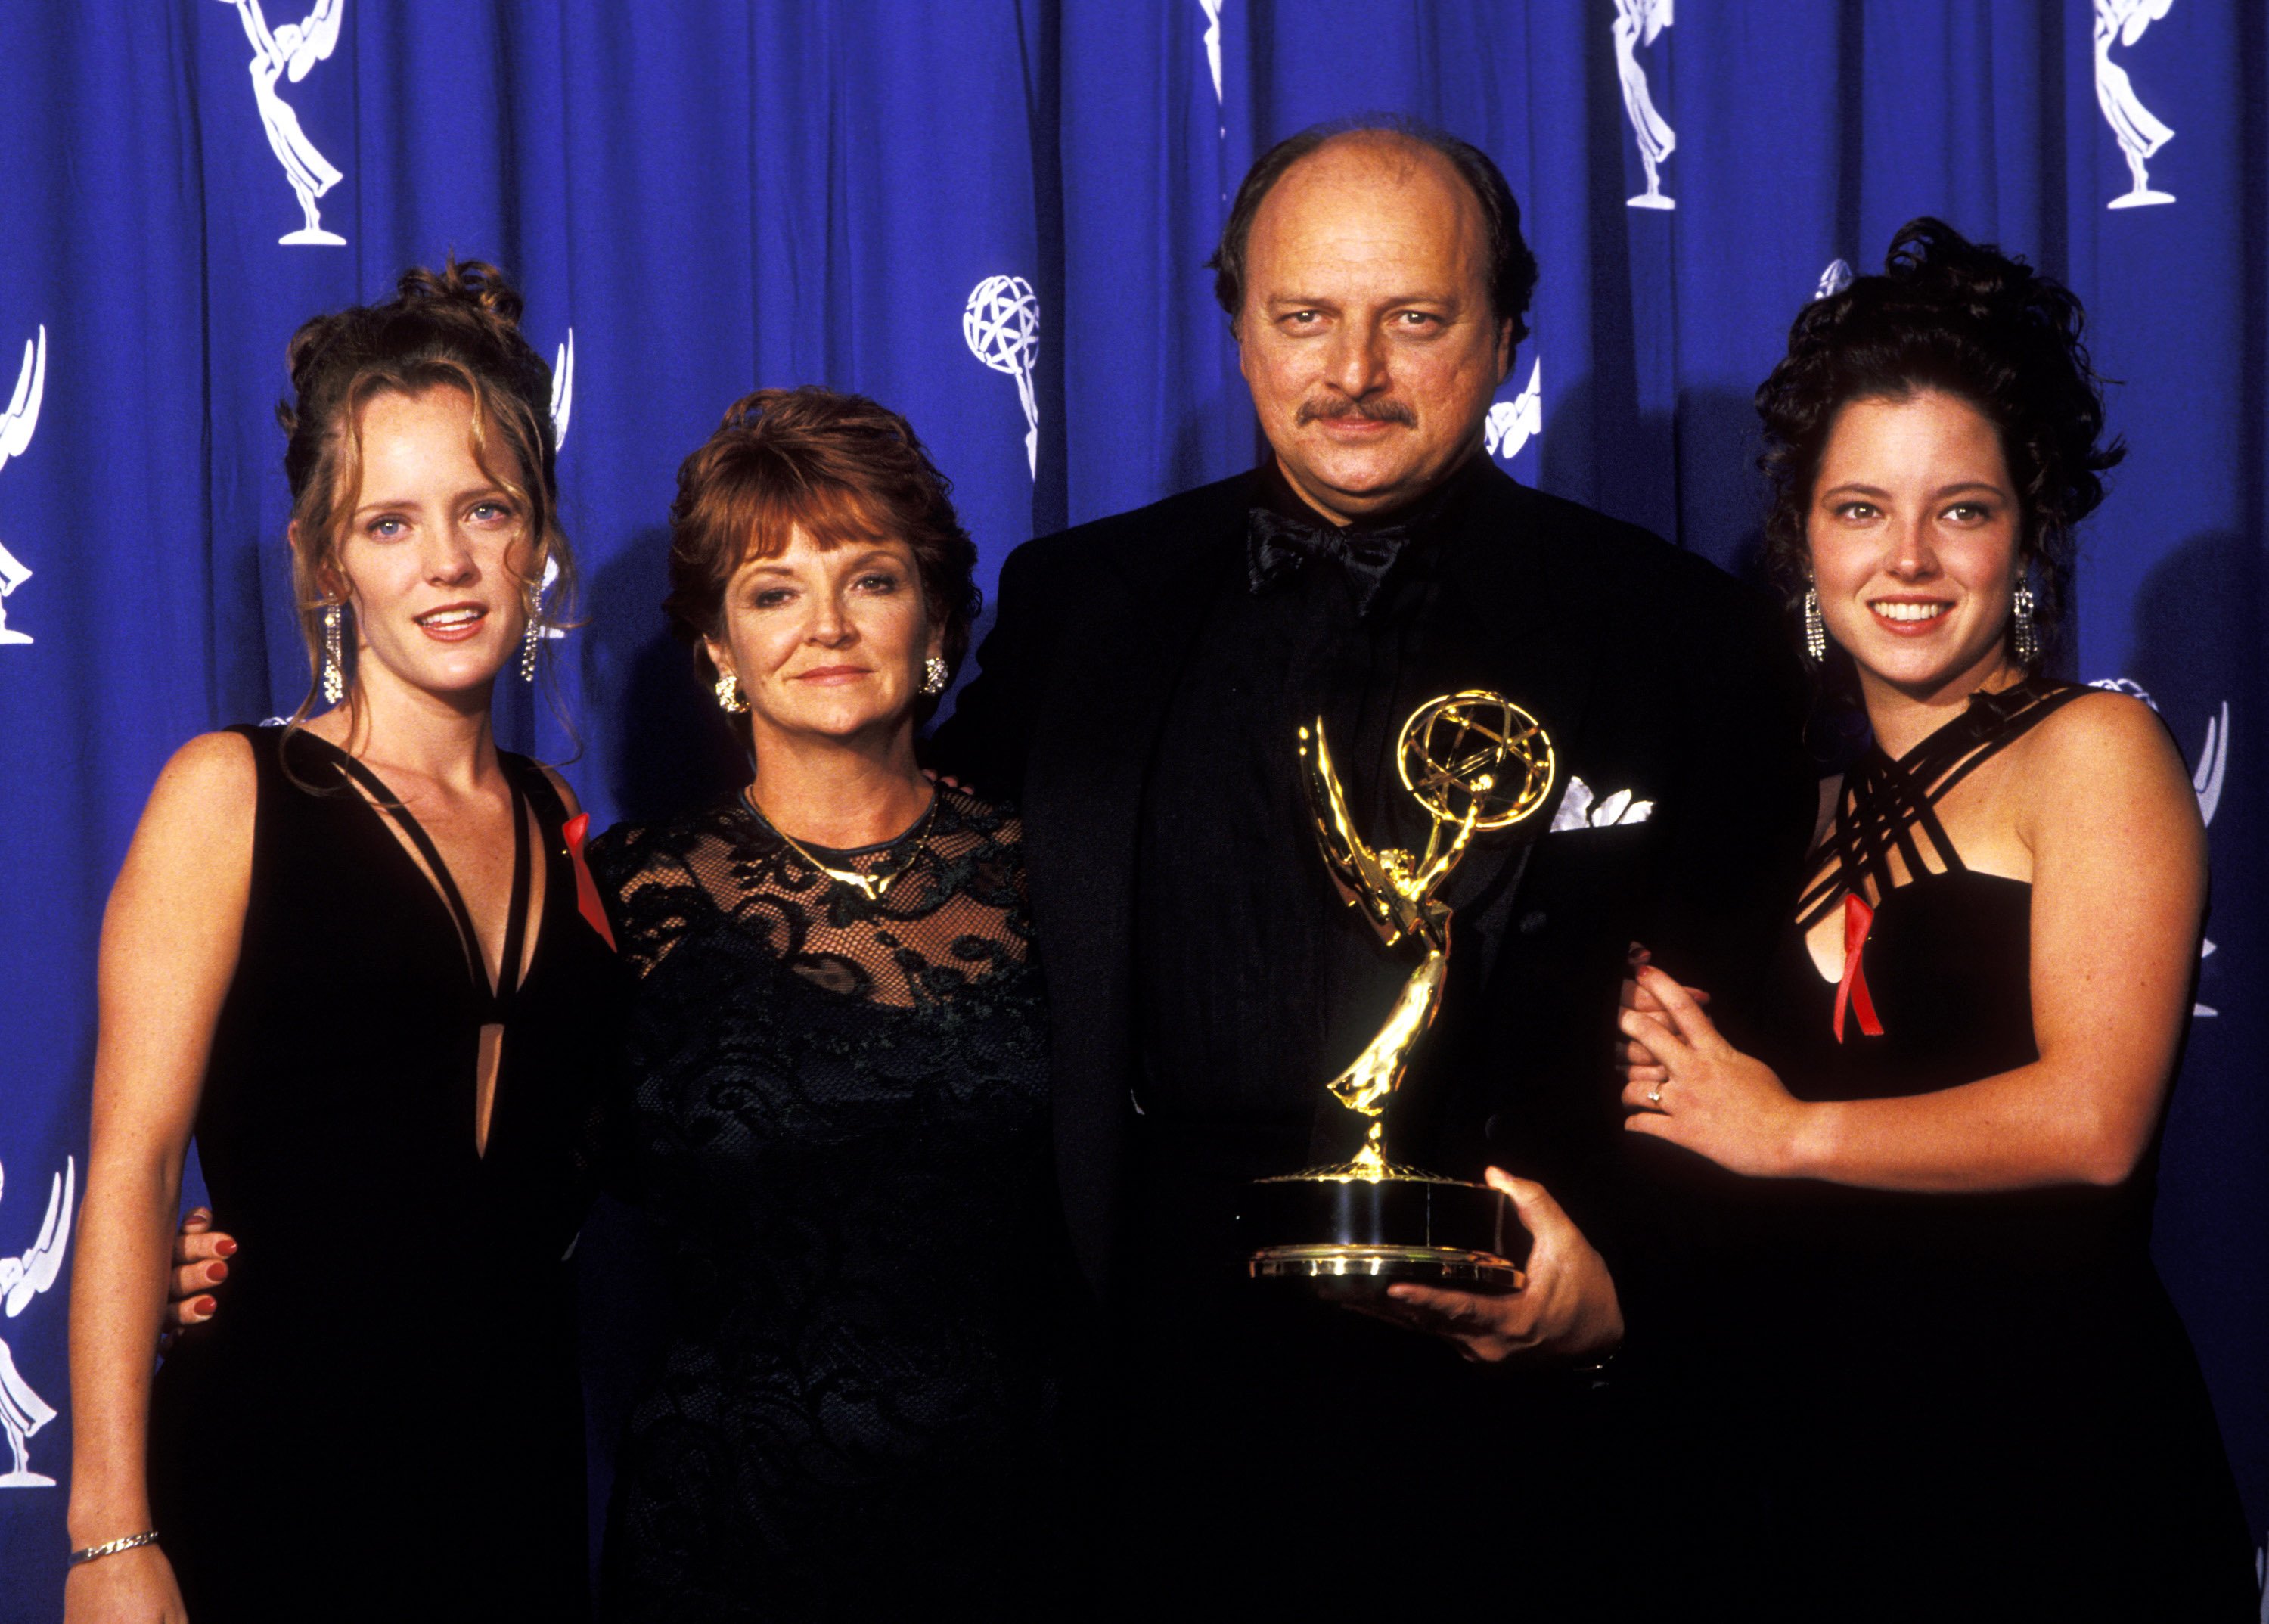 Dennis Franz with his wife, Joanie Zeck, and daughters Krista Zeck and Tricia Zeck during the 46th Annual Primetime Emmy Awards. / Source: Getty Images